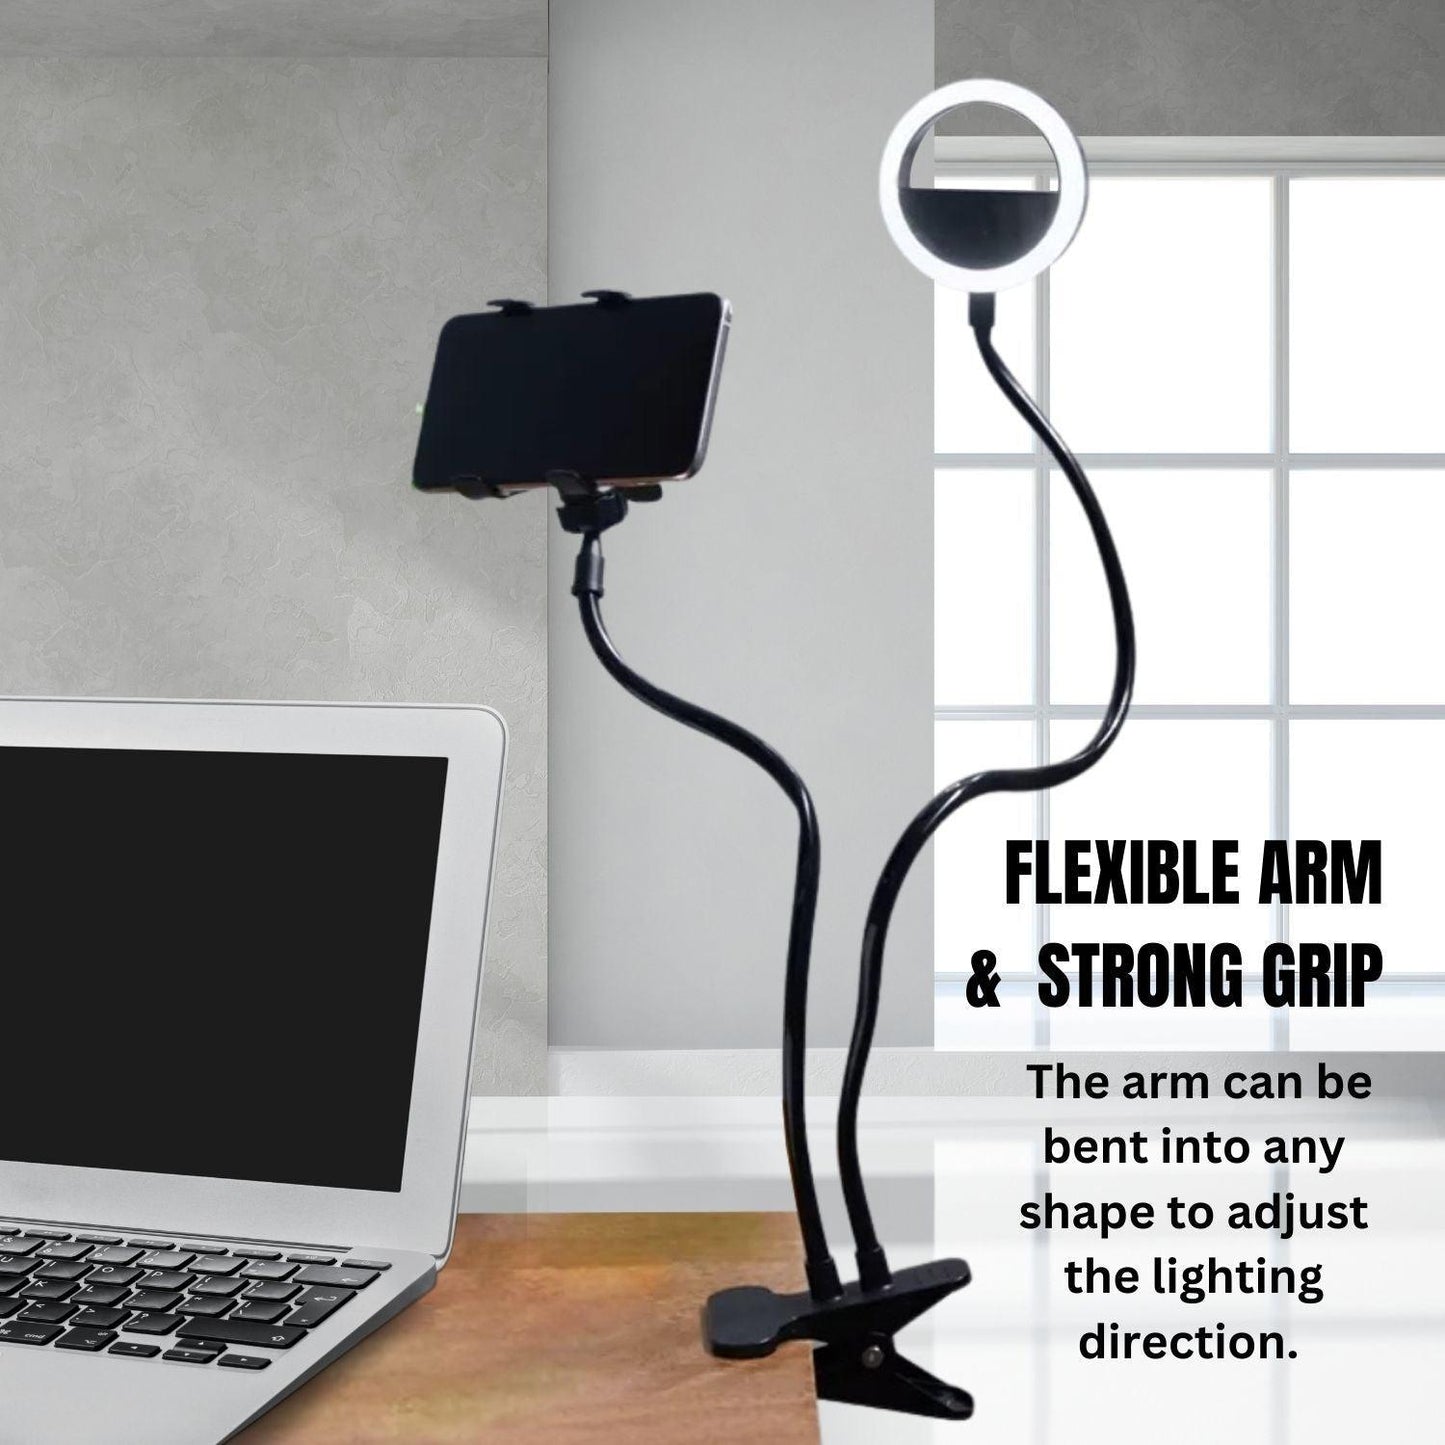 Flexible arm and strong grip to table